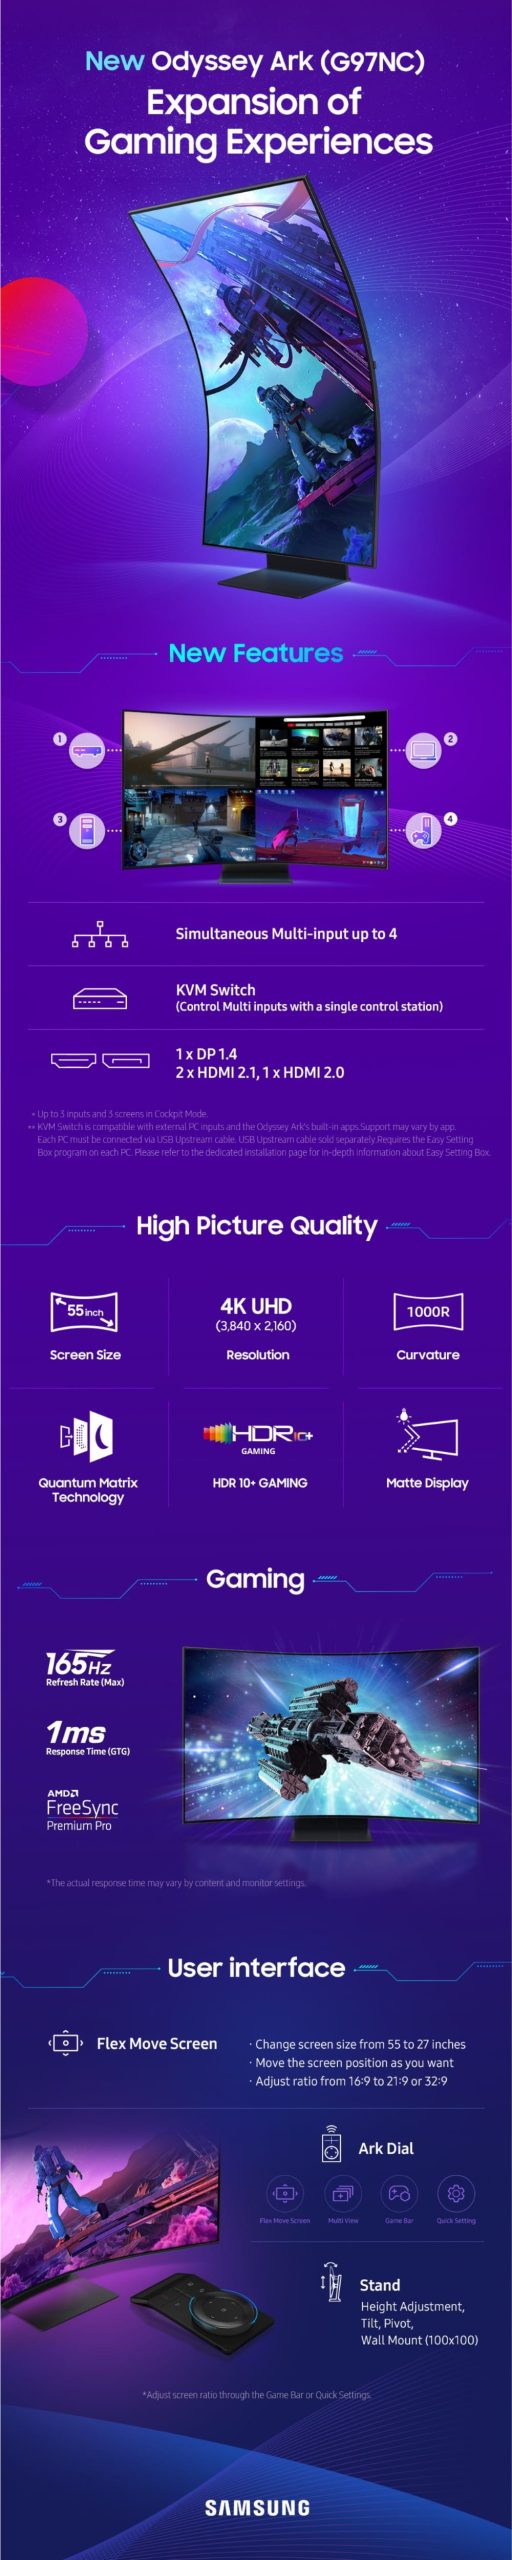 Samsung Odyssey Ark infographic scaled